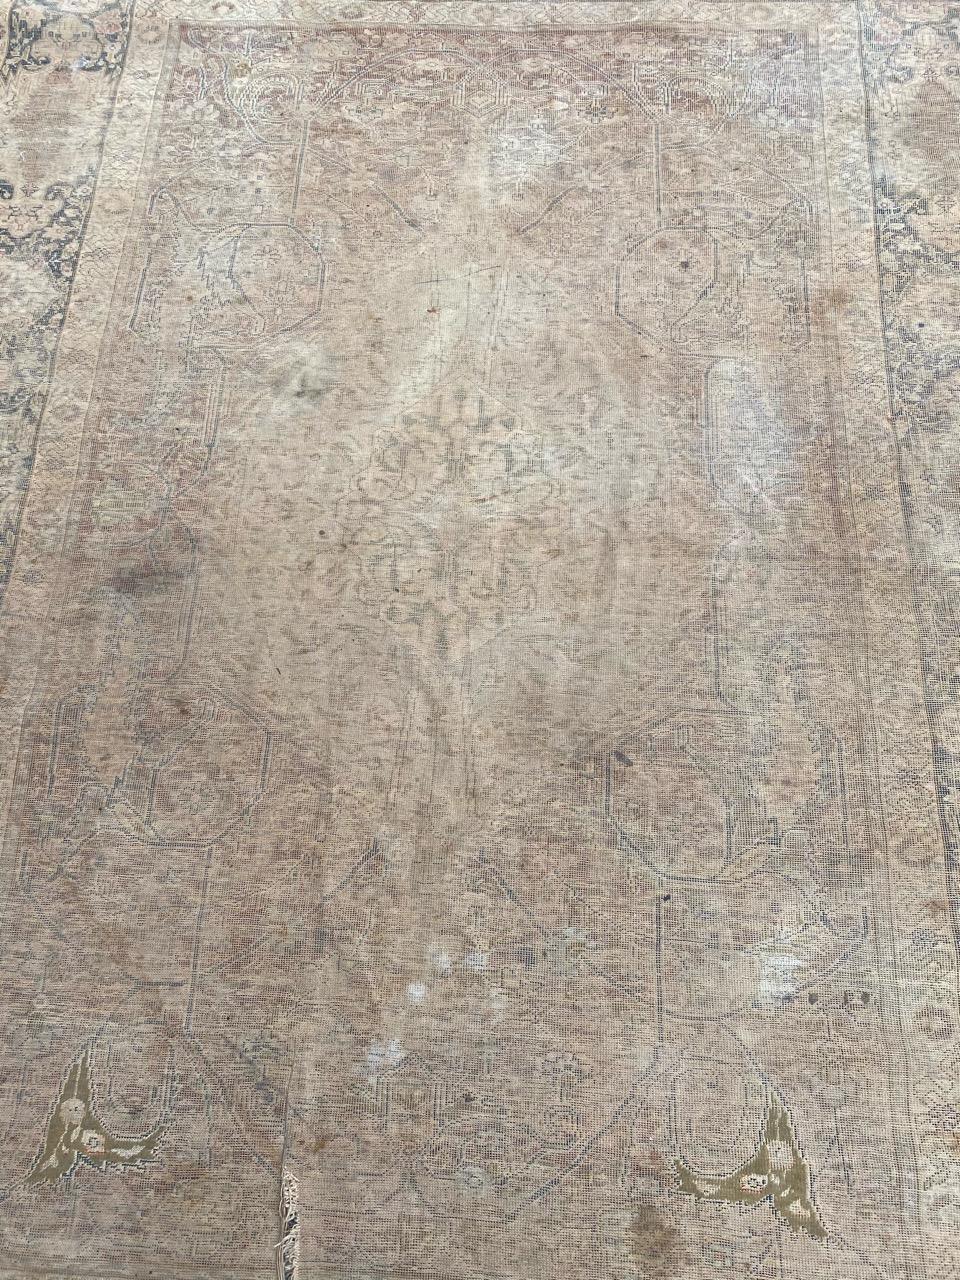 Very beautiful late 19th century Turkish distressed rug with beautiful floral design and nice colors, entirely hand knotted with wool on cotton foundation. Wears.